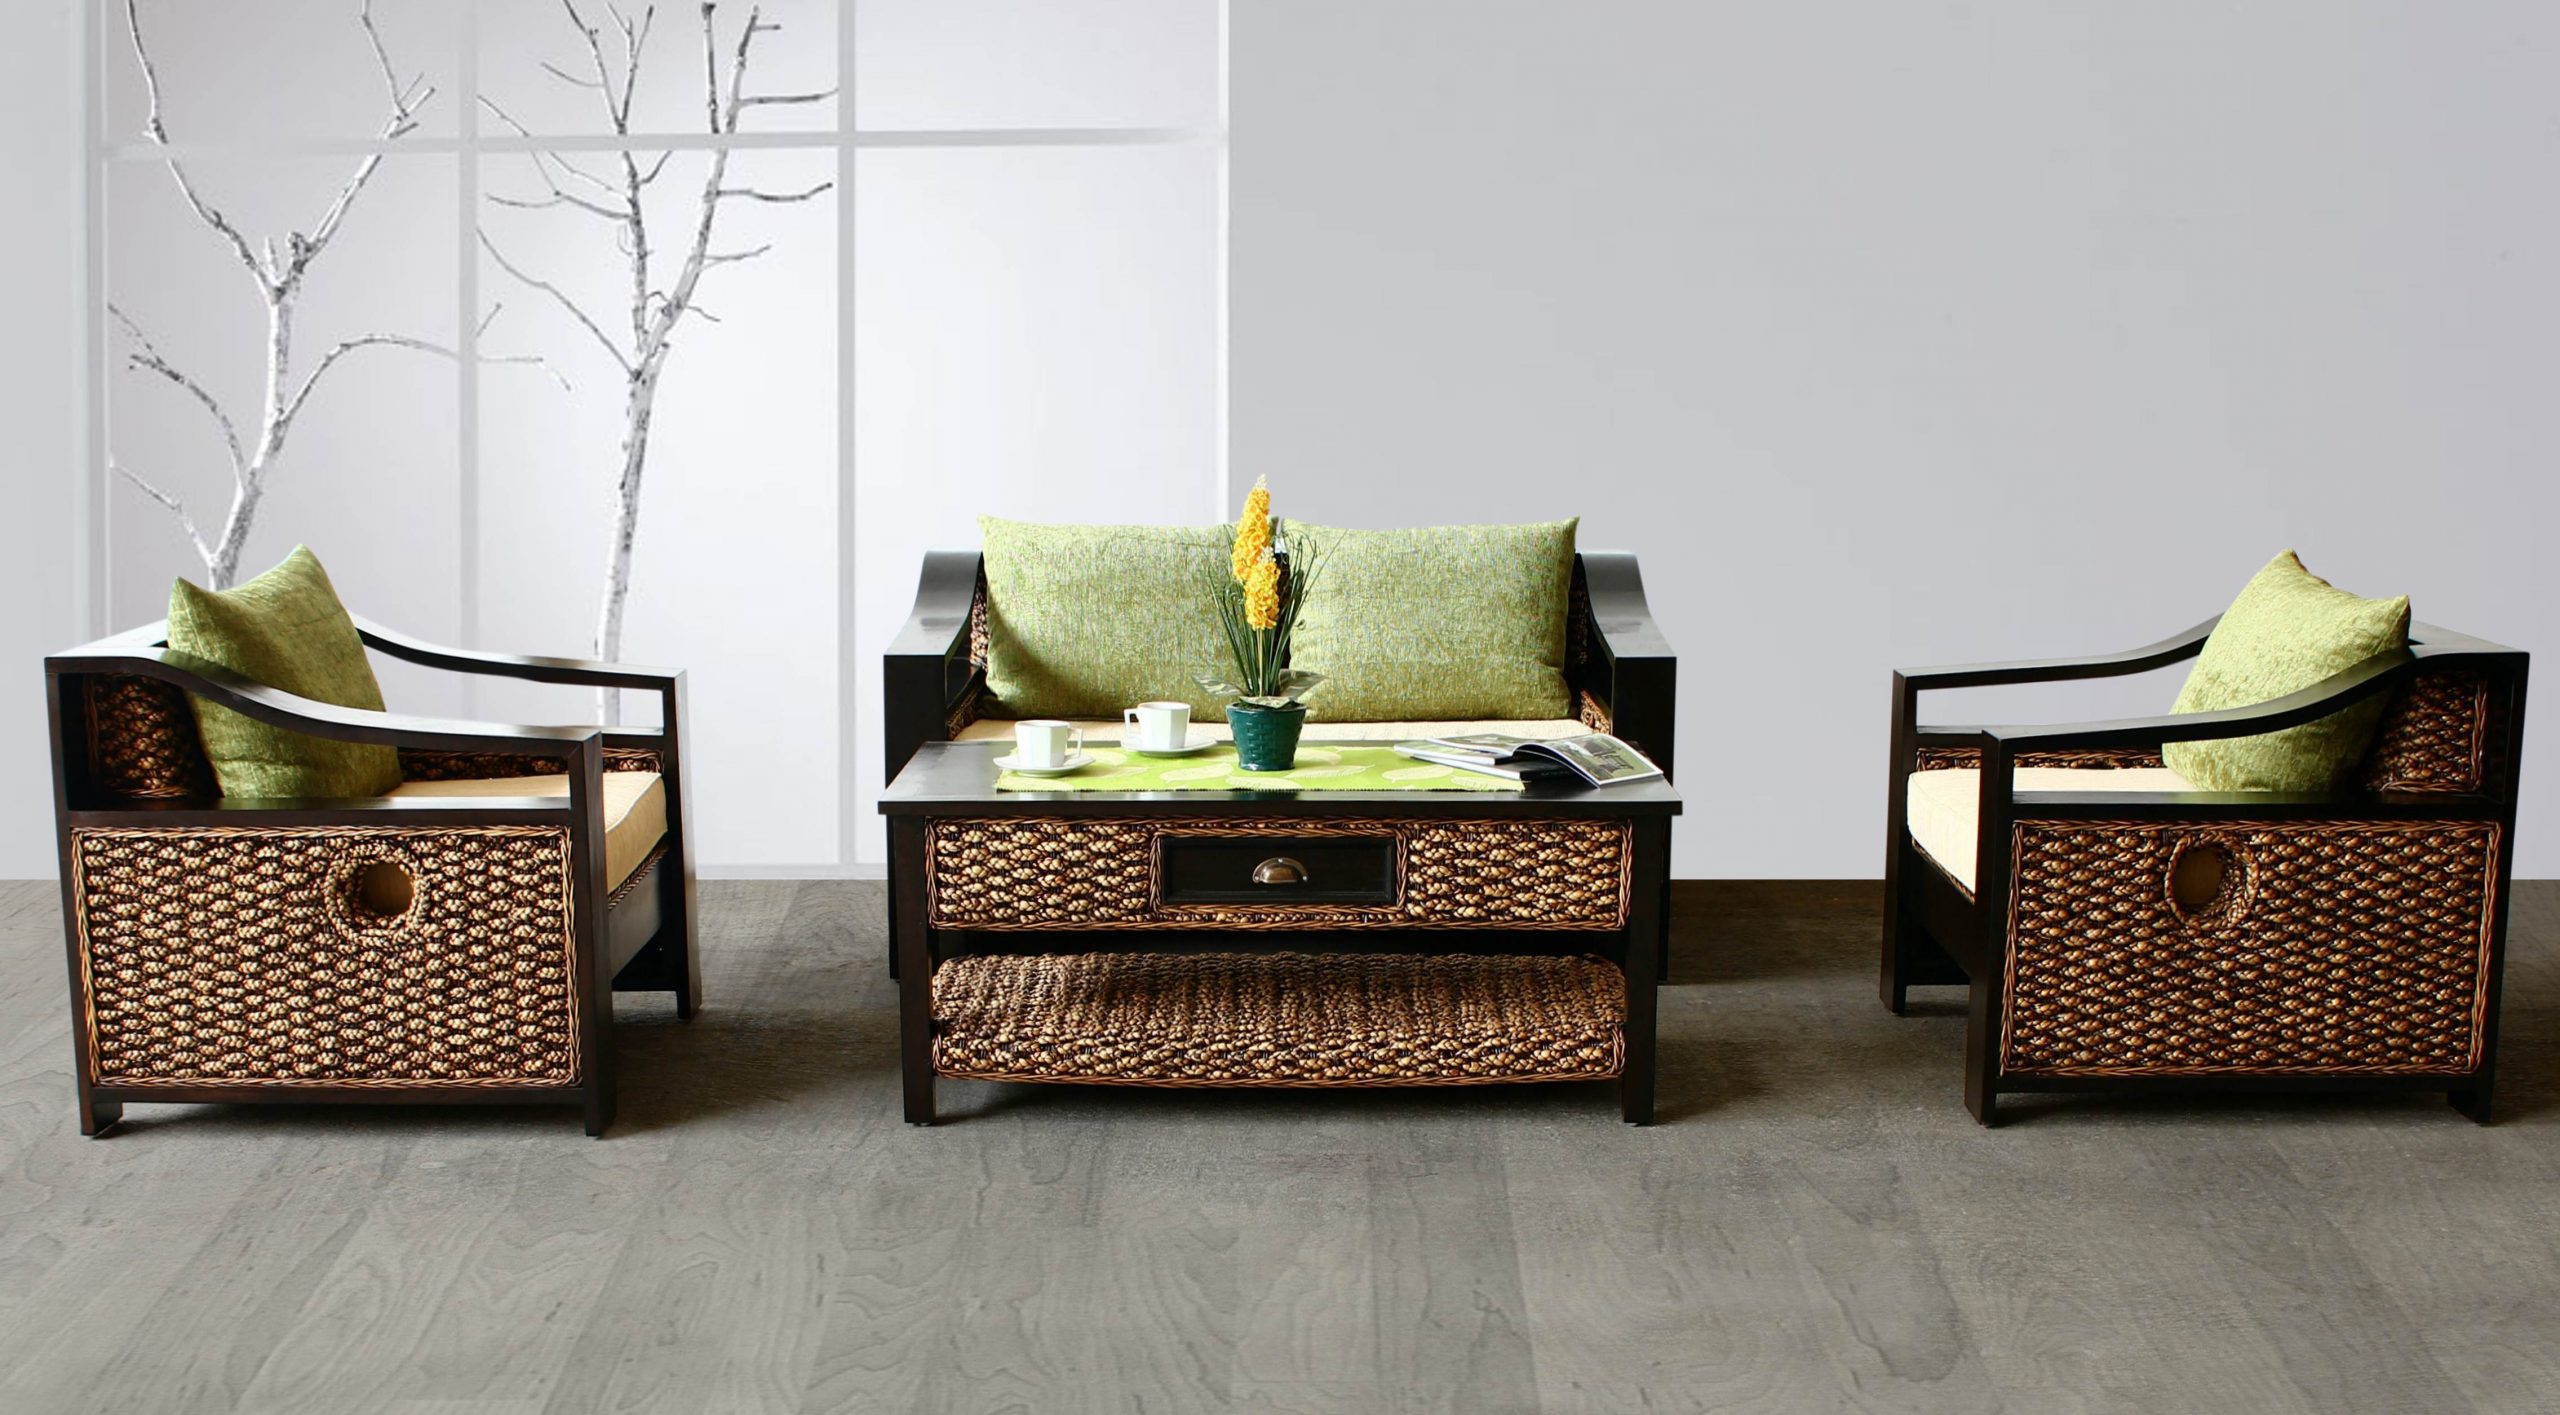 Furniture Wholesaler Indonesia: Providing High Quality Pieces At Competitive Prices